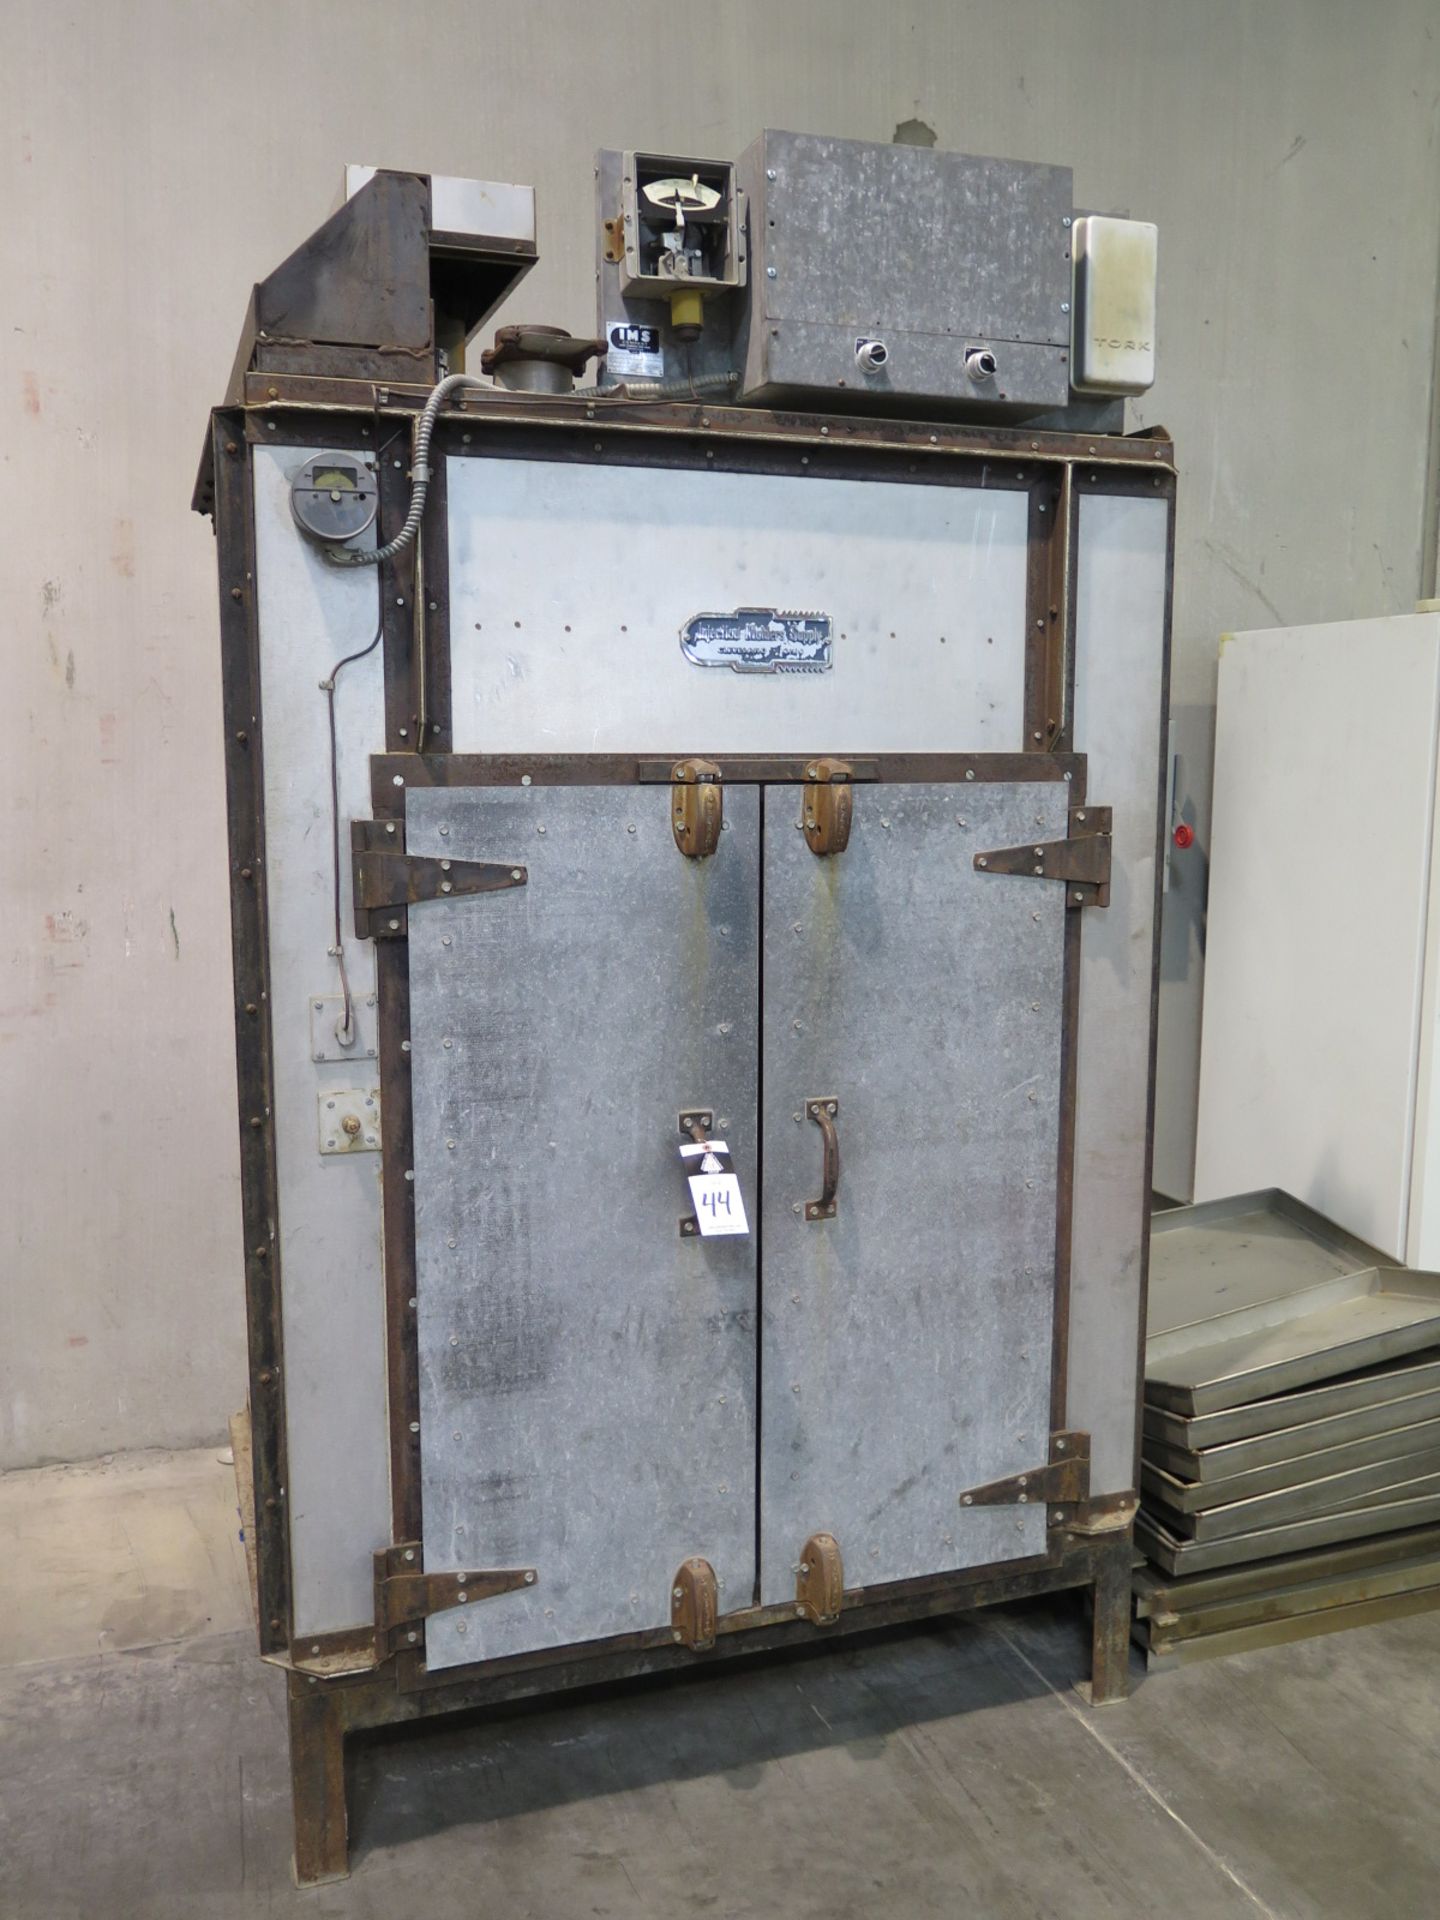 IMS mdl. DLD-0724 8kW Oven s/n 6001